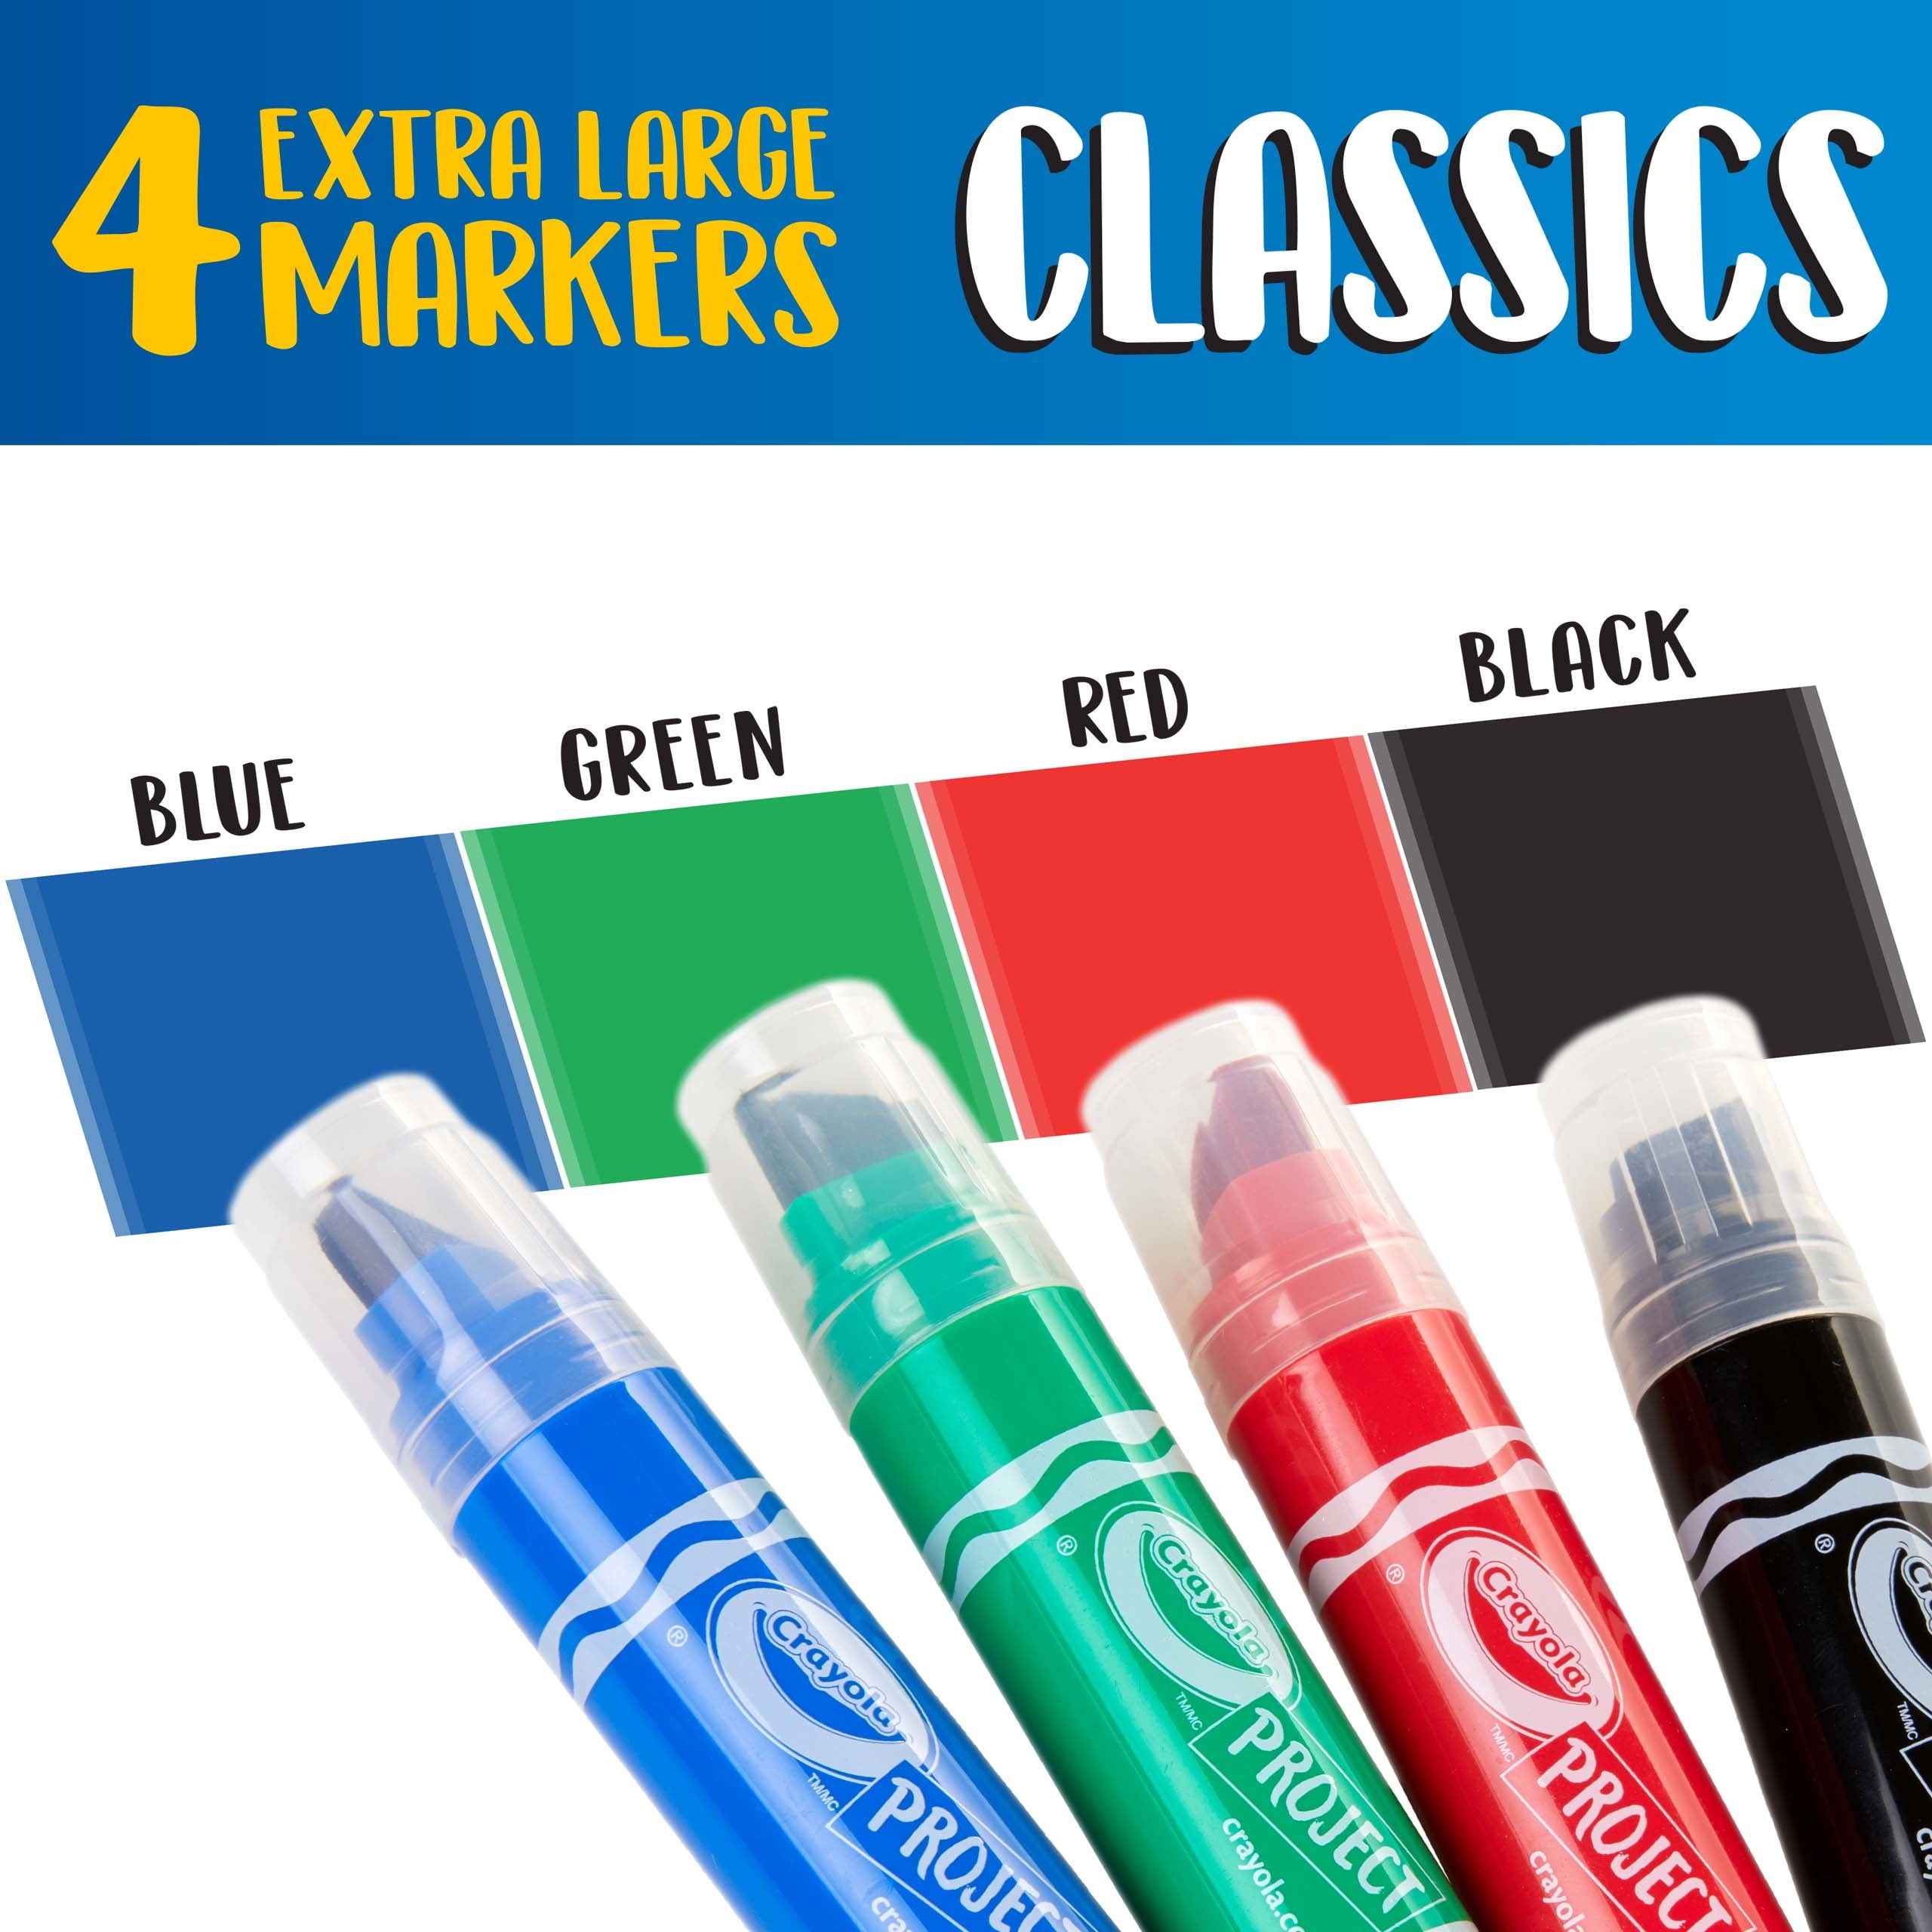 TeachersParadise - Crayola® Project XL Poster Markers, Classic, 4 Per Pack,  3 Packs - BIN588356-3